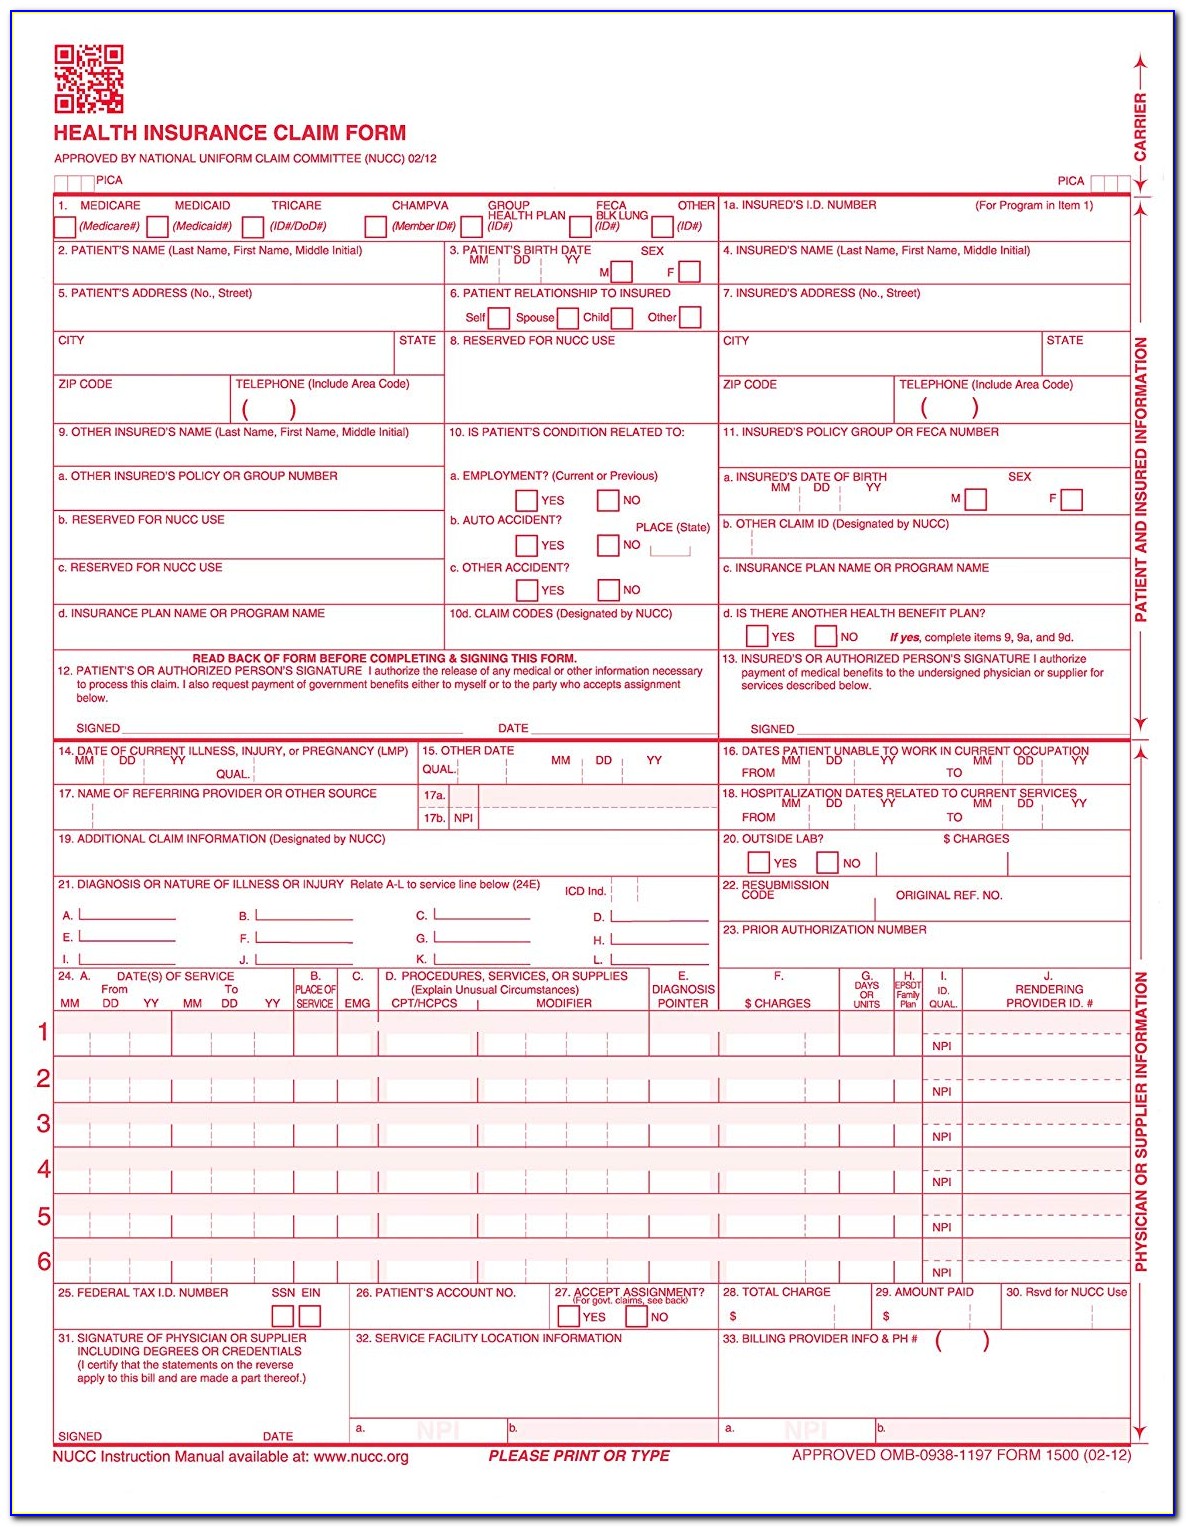 Free Cms 1500 Form Fillable